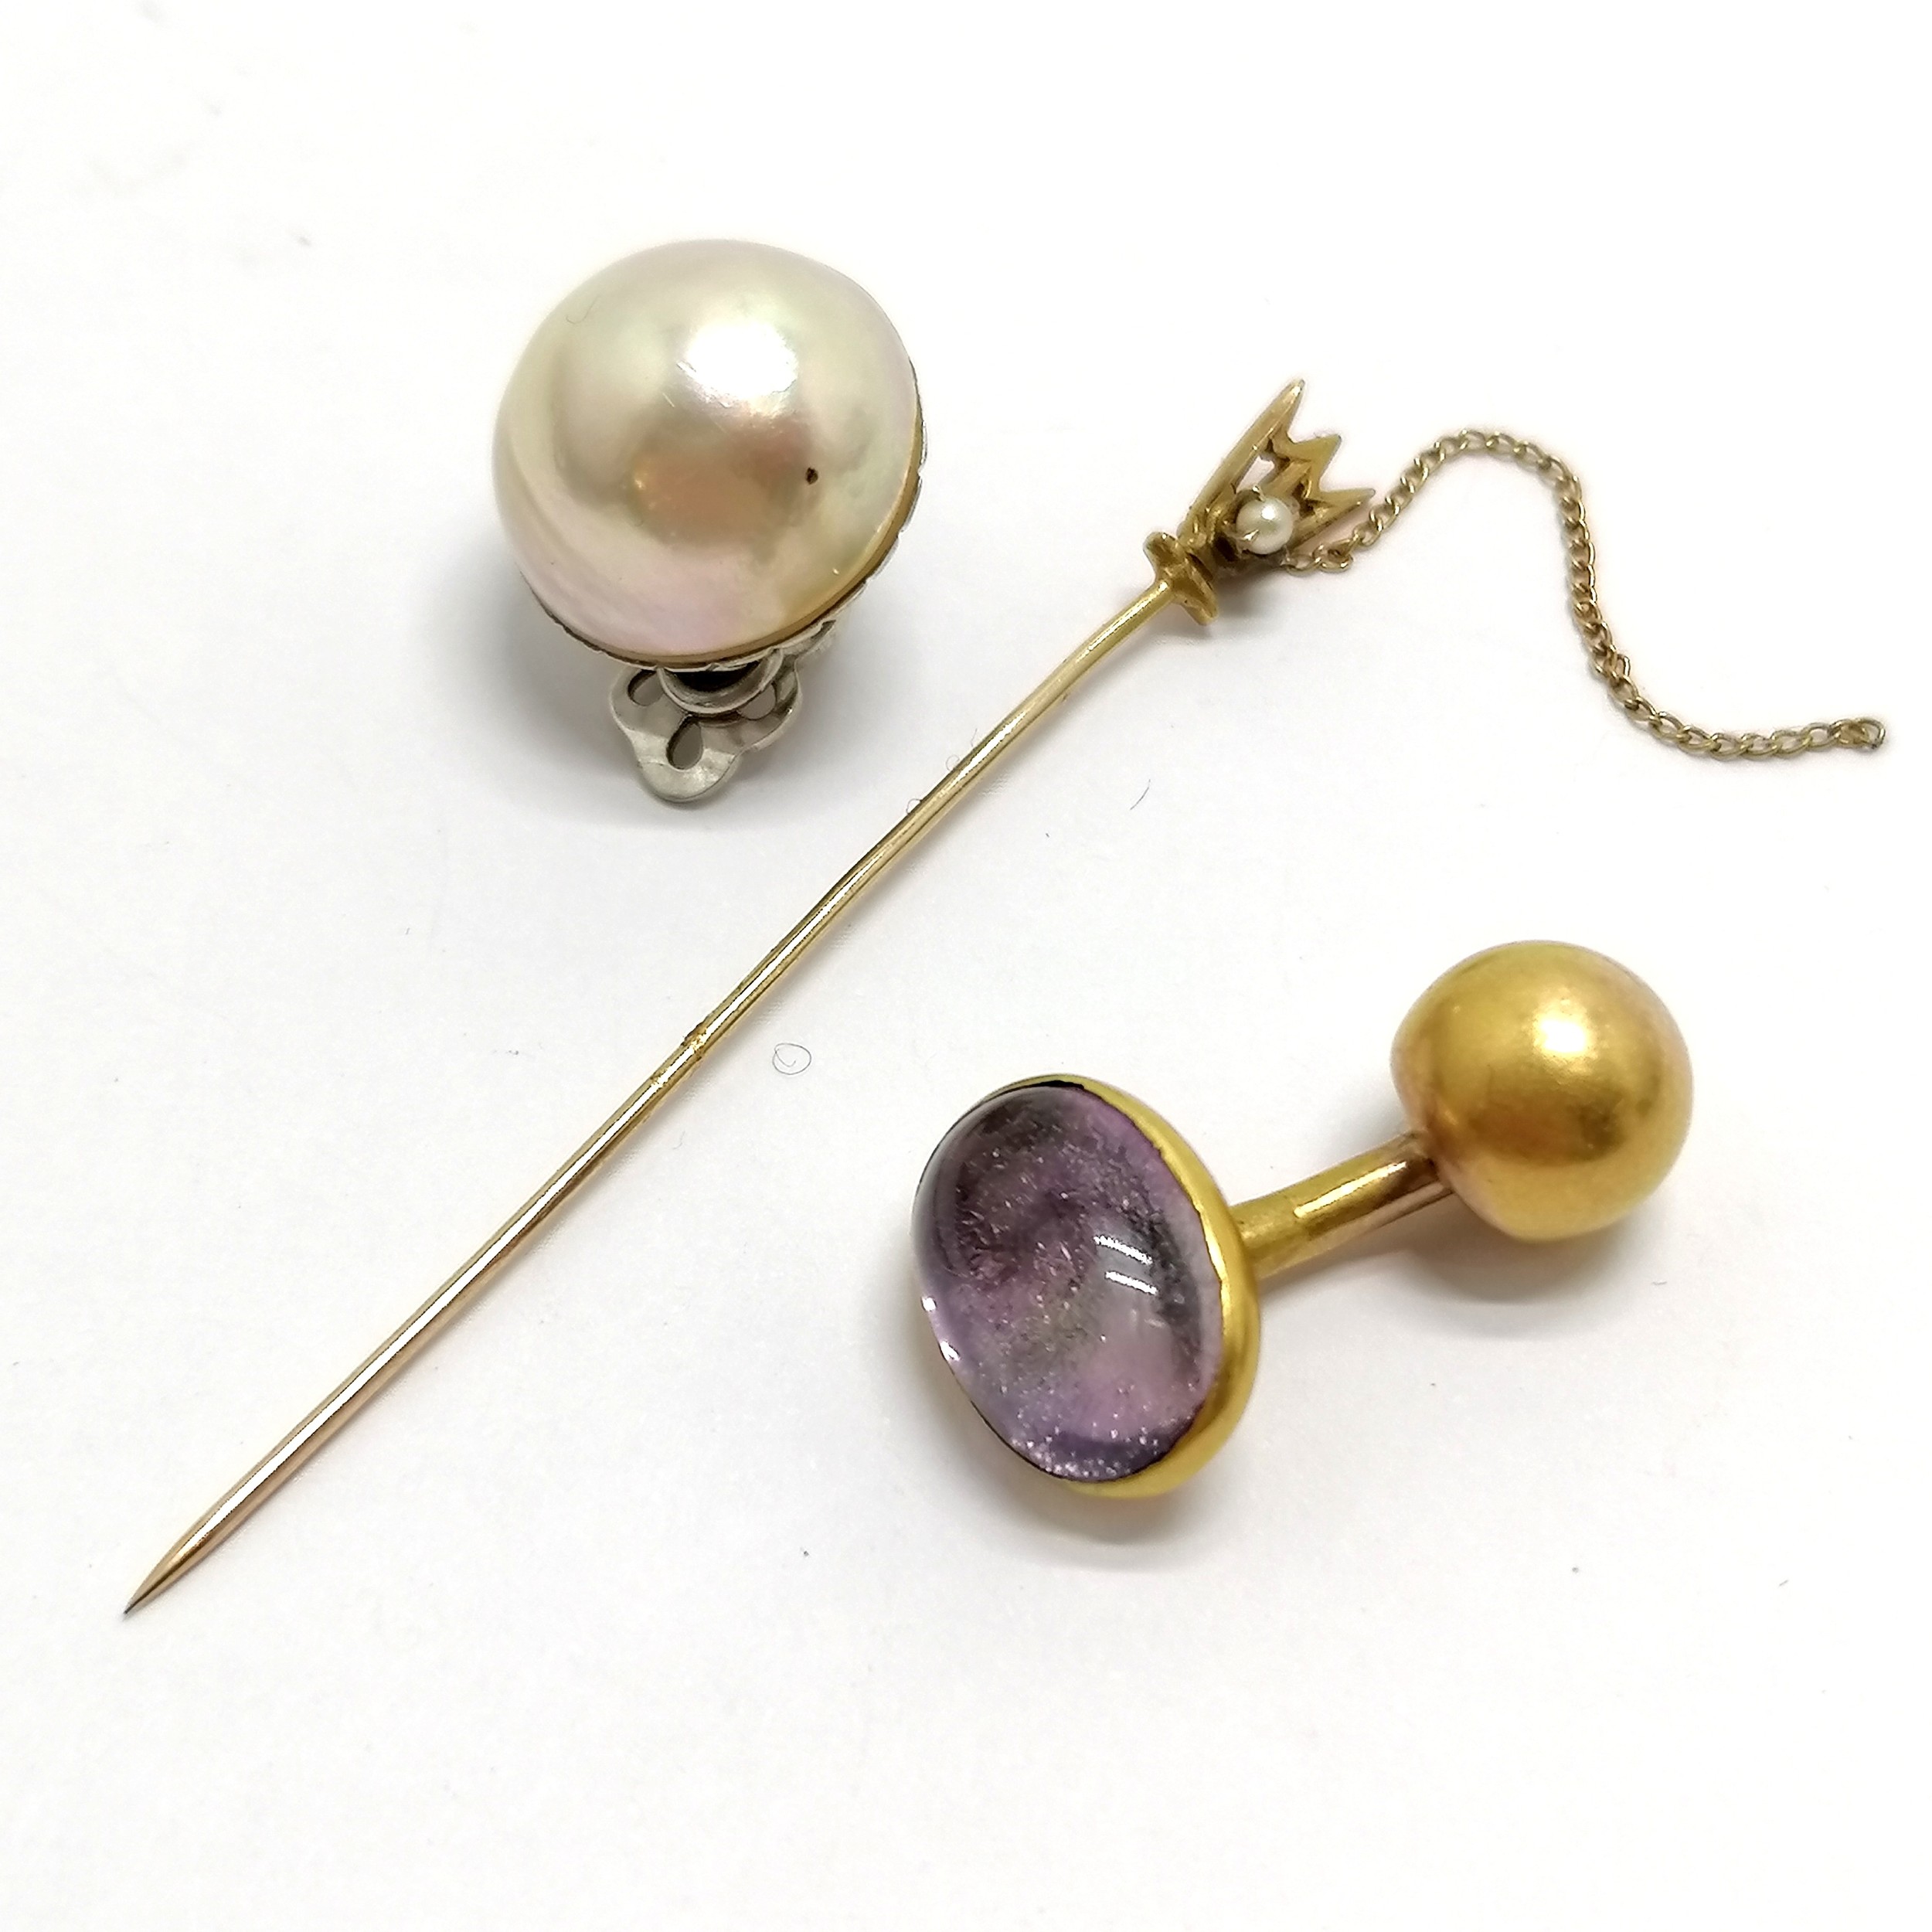 14ct marked white gold mabe pearl earring (1 only), unmarked antique cufflink & pin set with a pearl